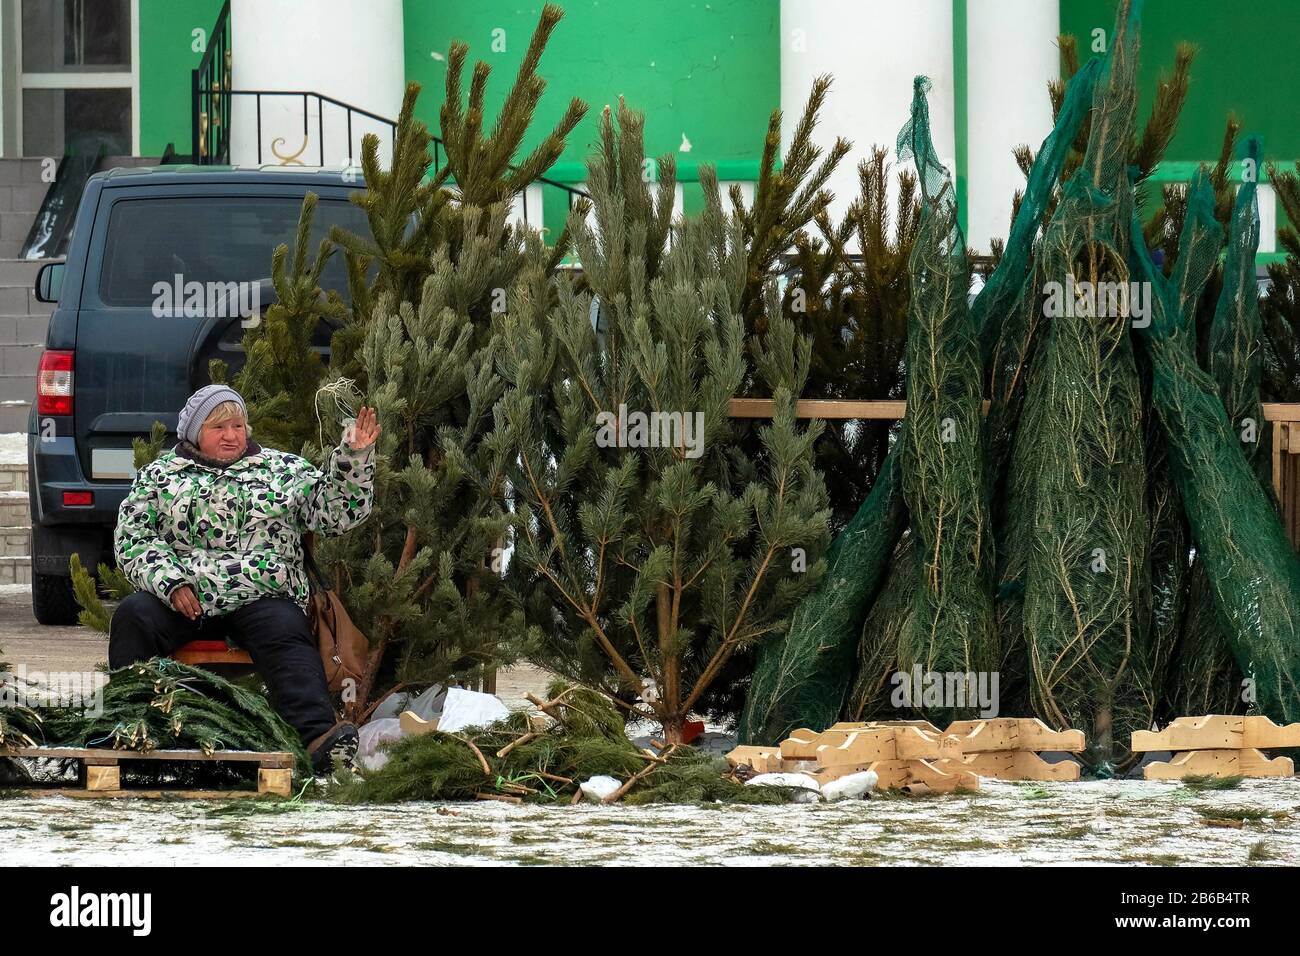 Sale of Christmas trees and pines for the New Year. The tree market in winter. Stock Photo